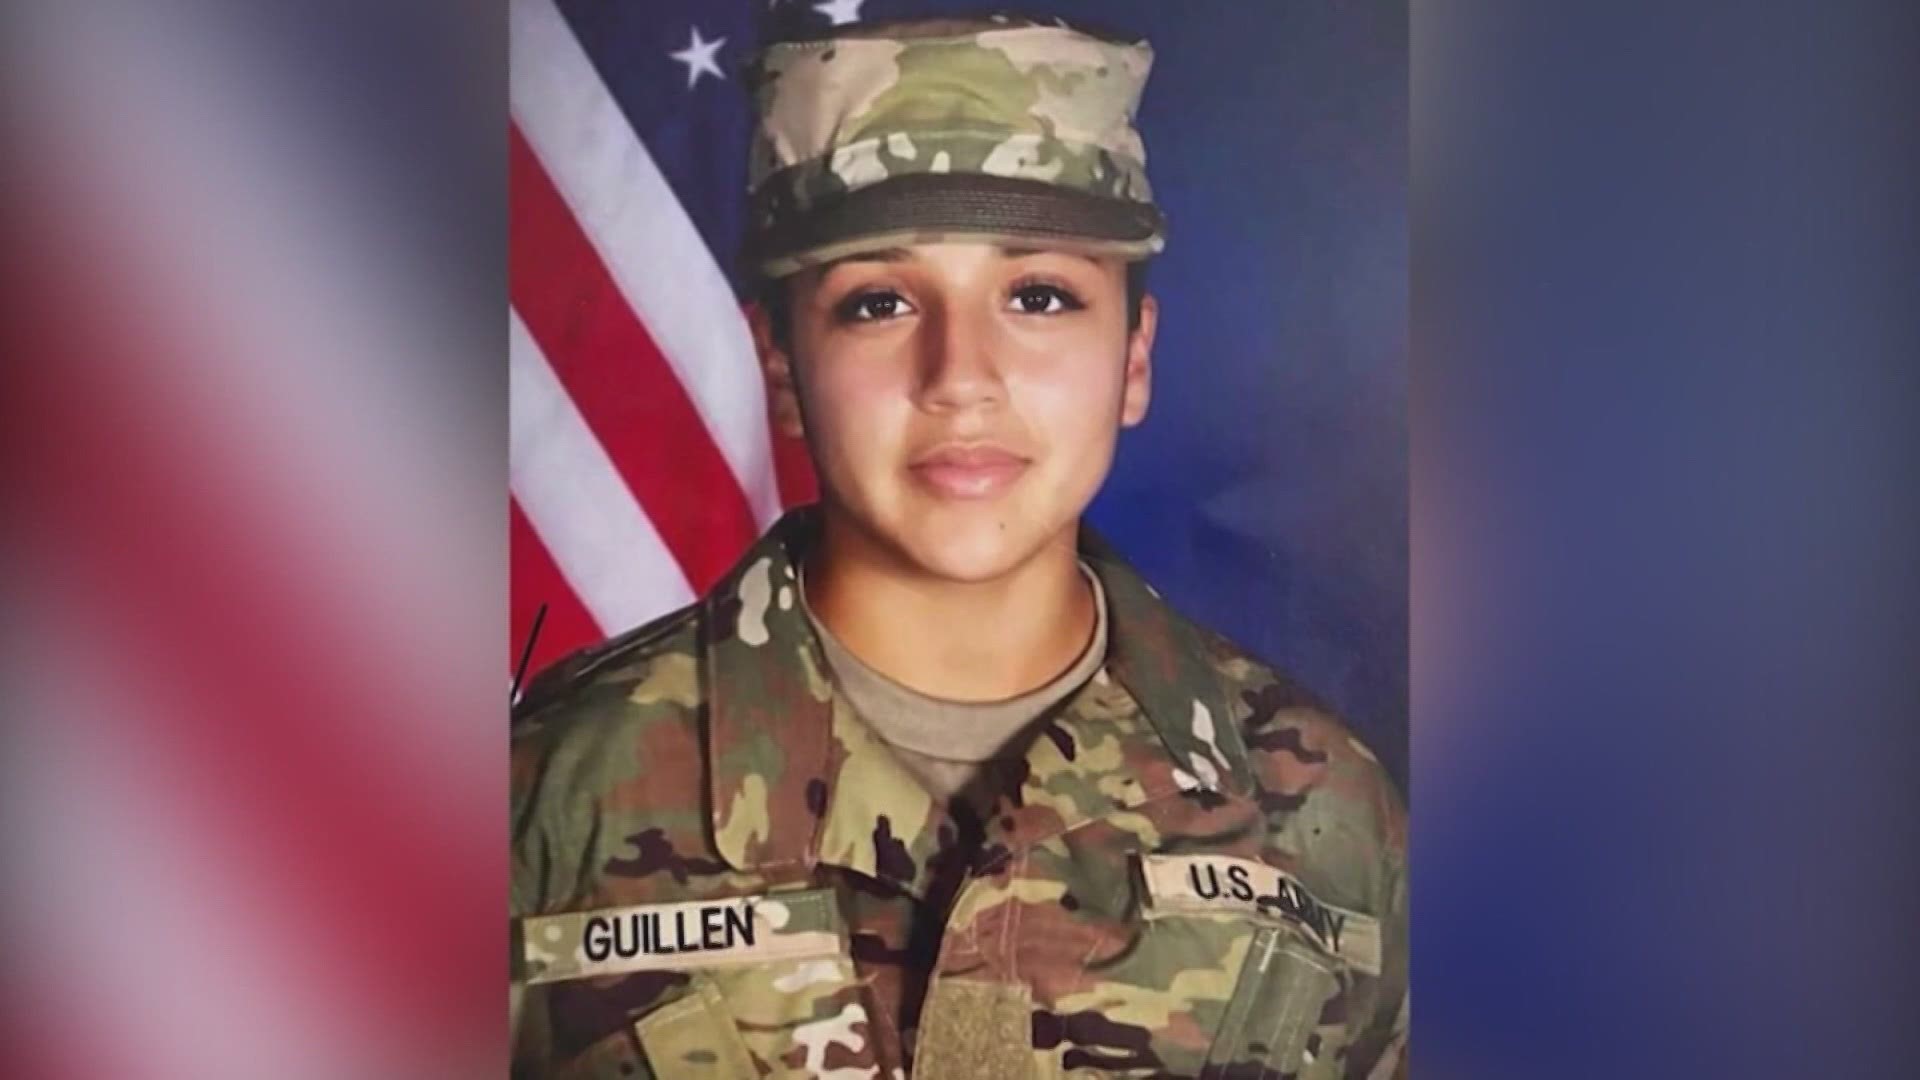 The report from Army included nine key findings from their investigation of how Vanessa Guillen's disappearance and death was handled.